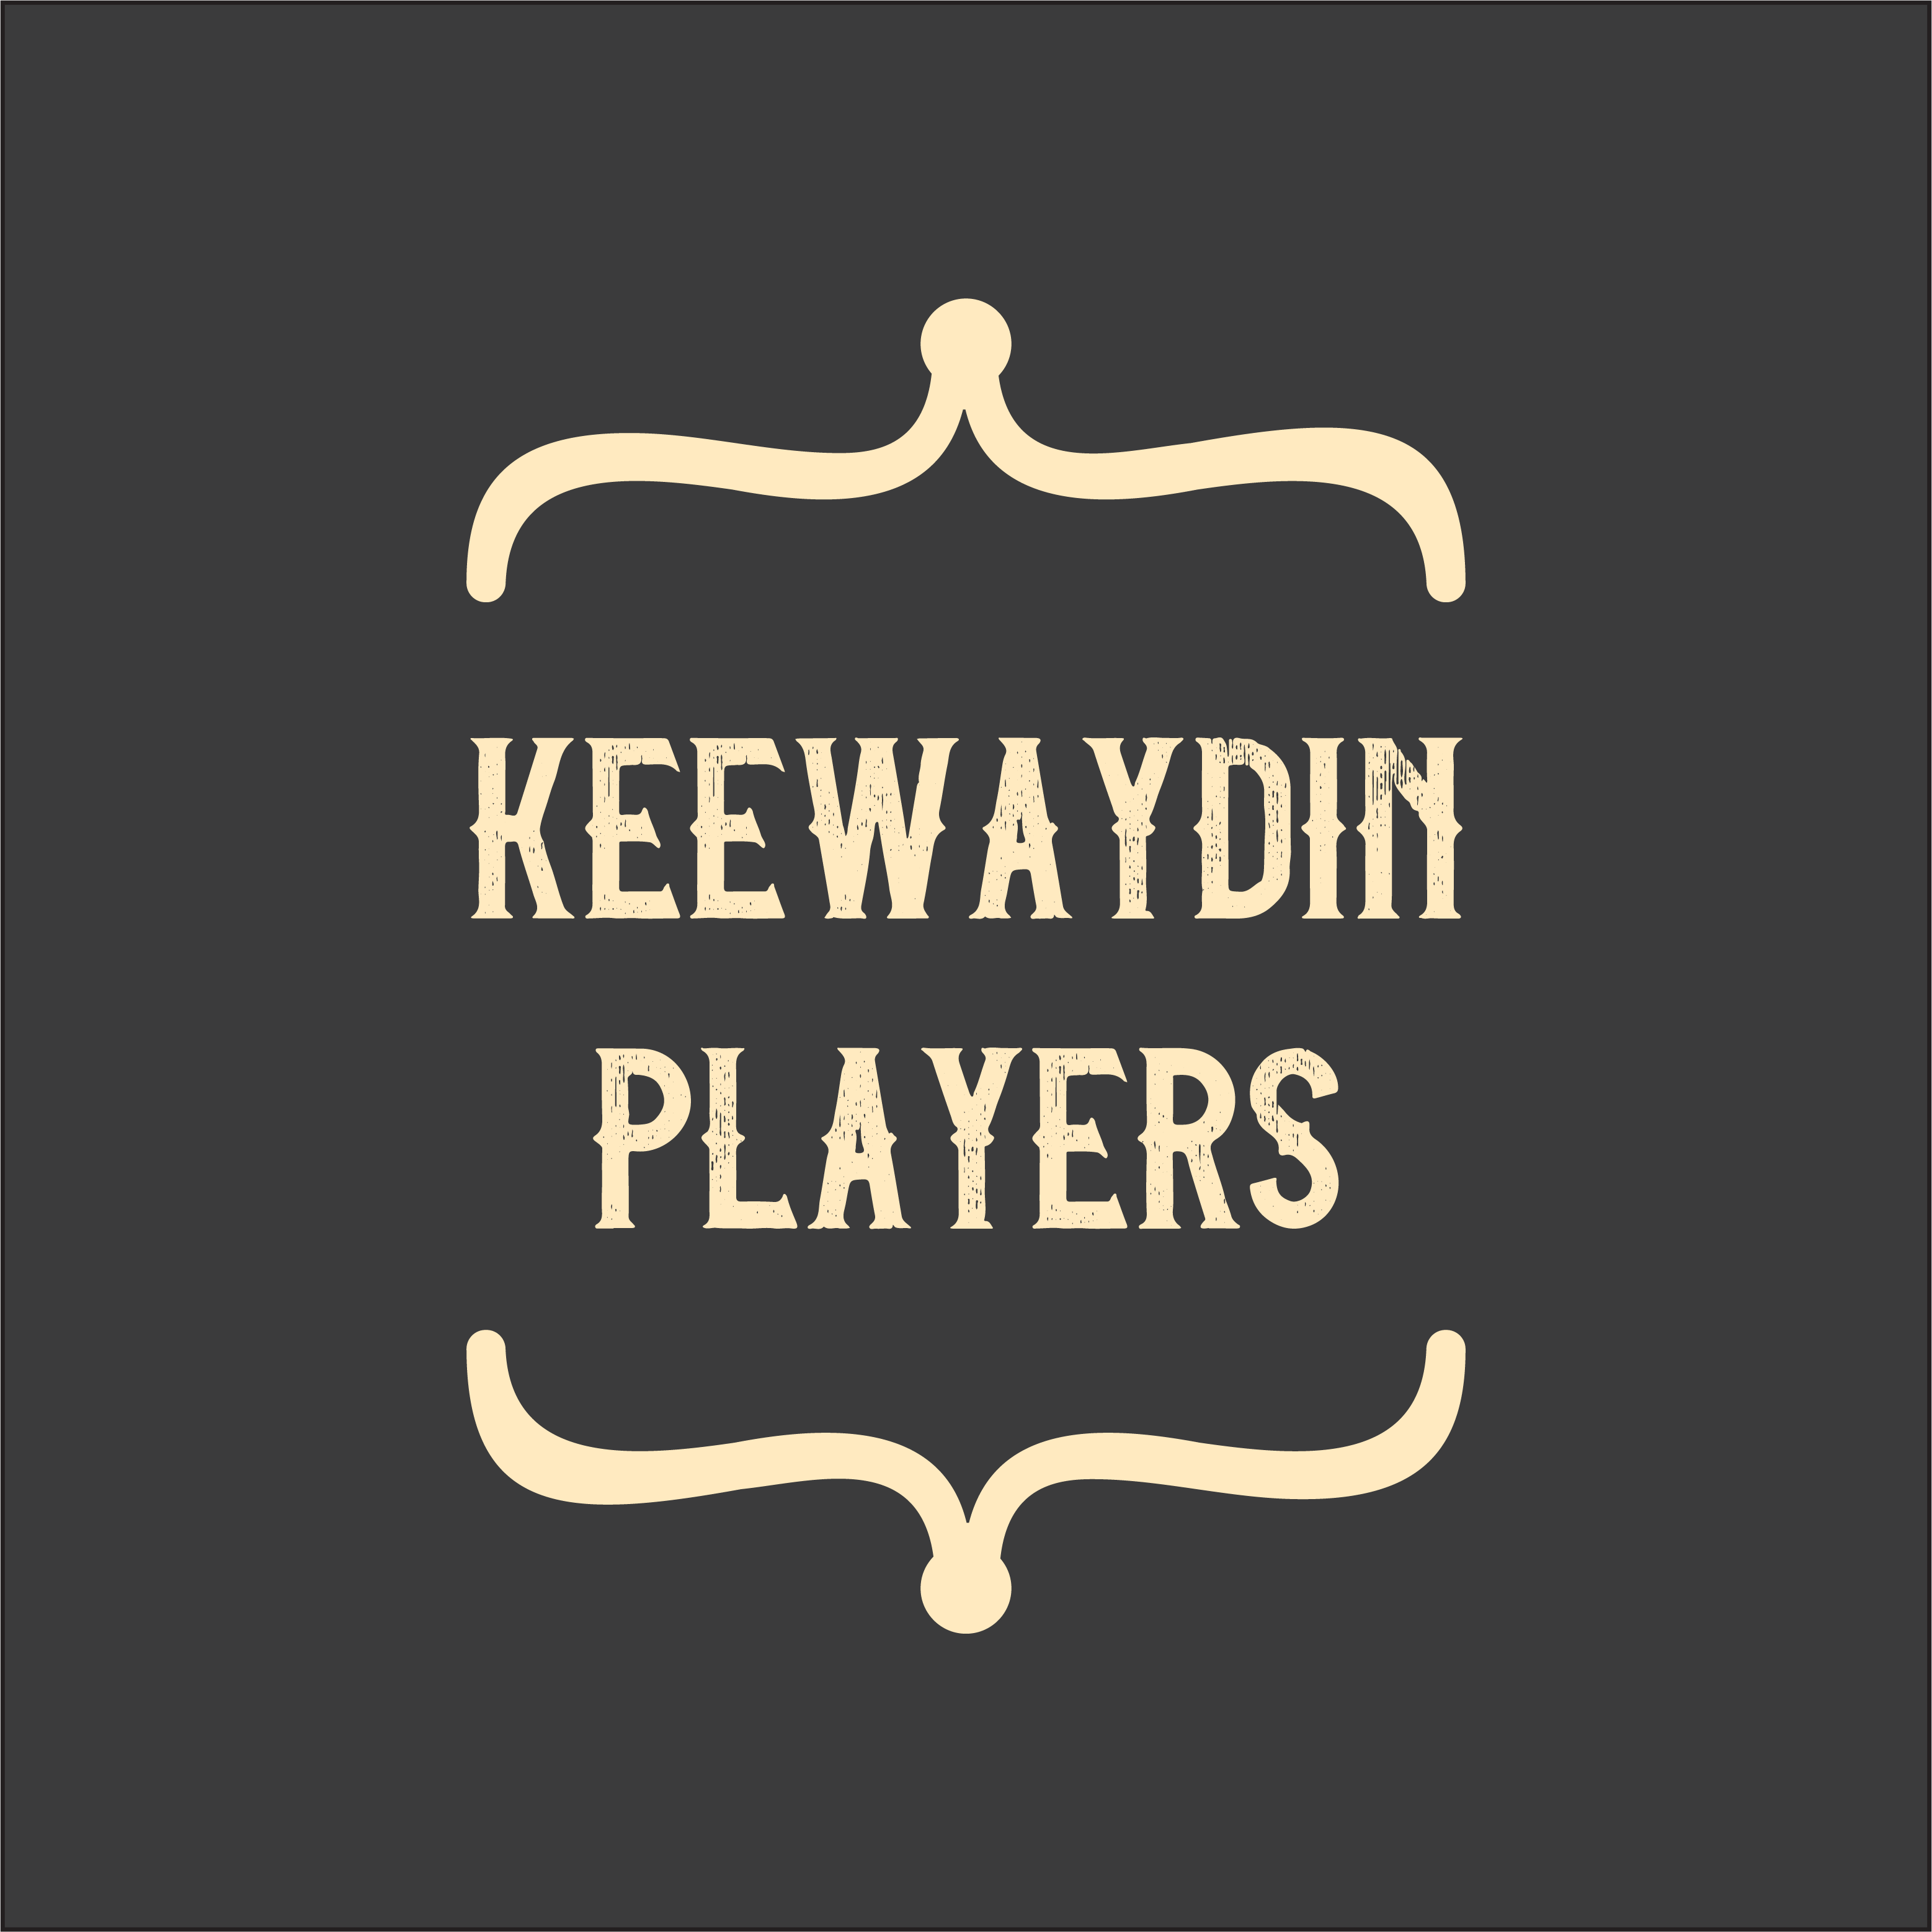 A picture that that says 'Keewaydin Players', with vertical brackets above and below the words.